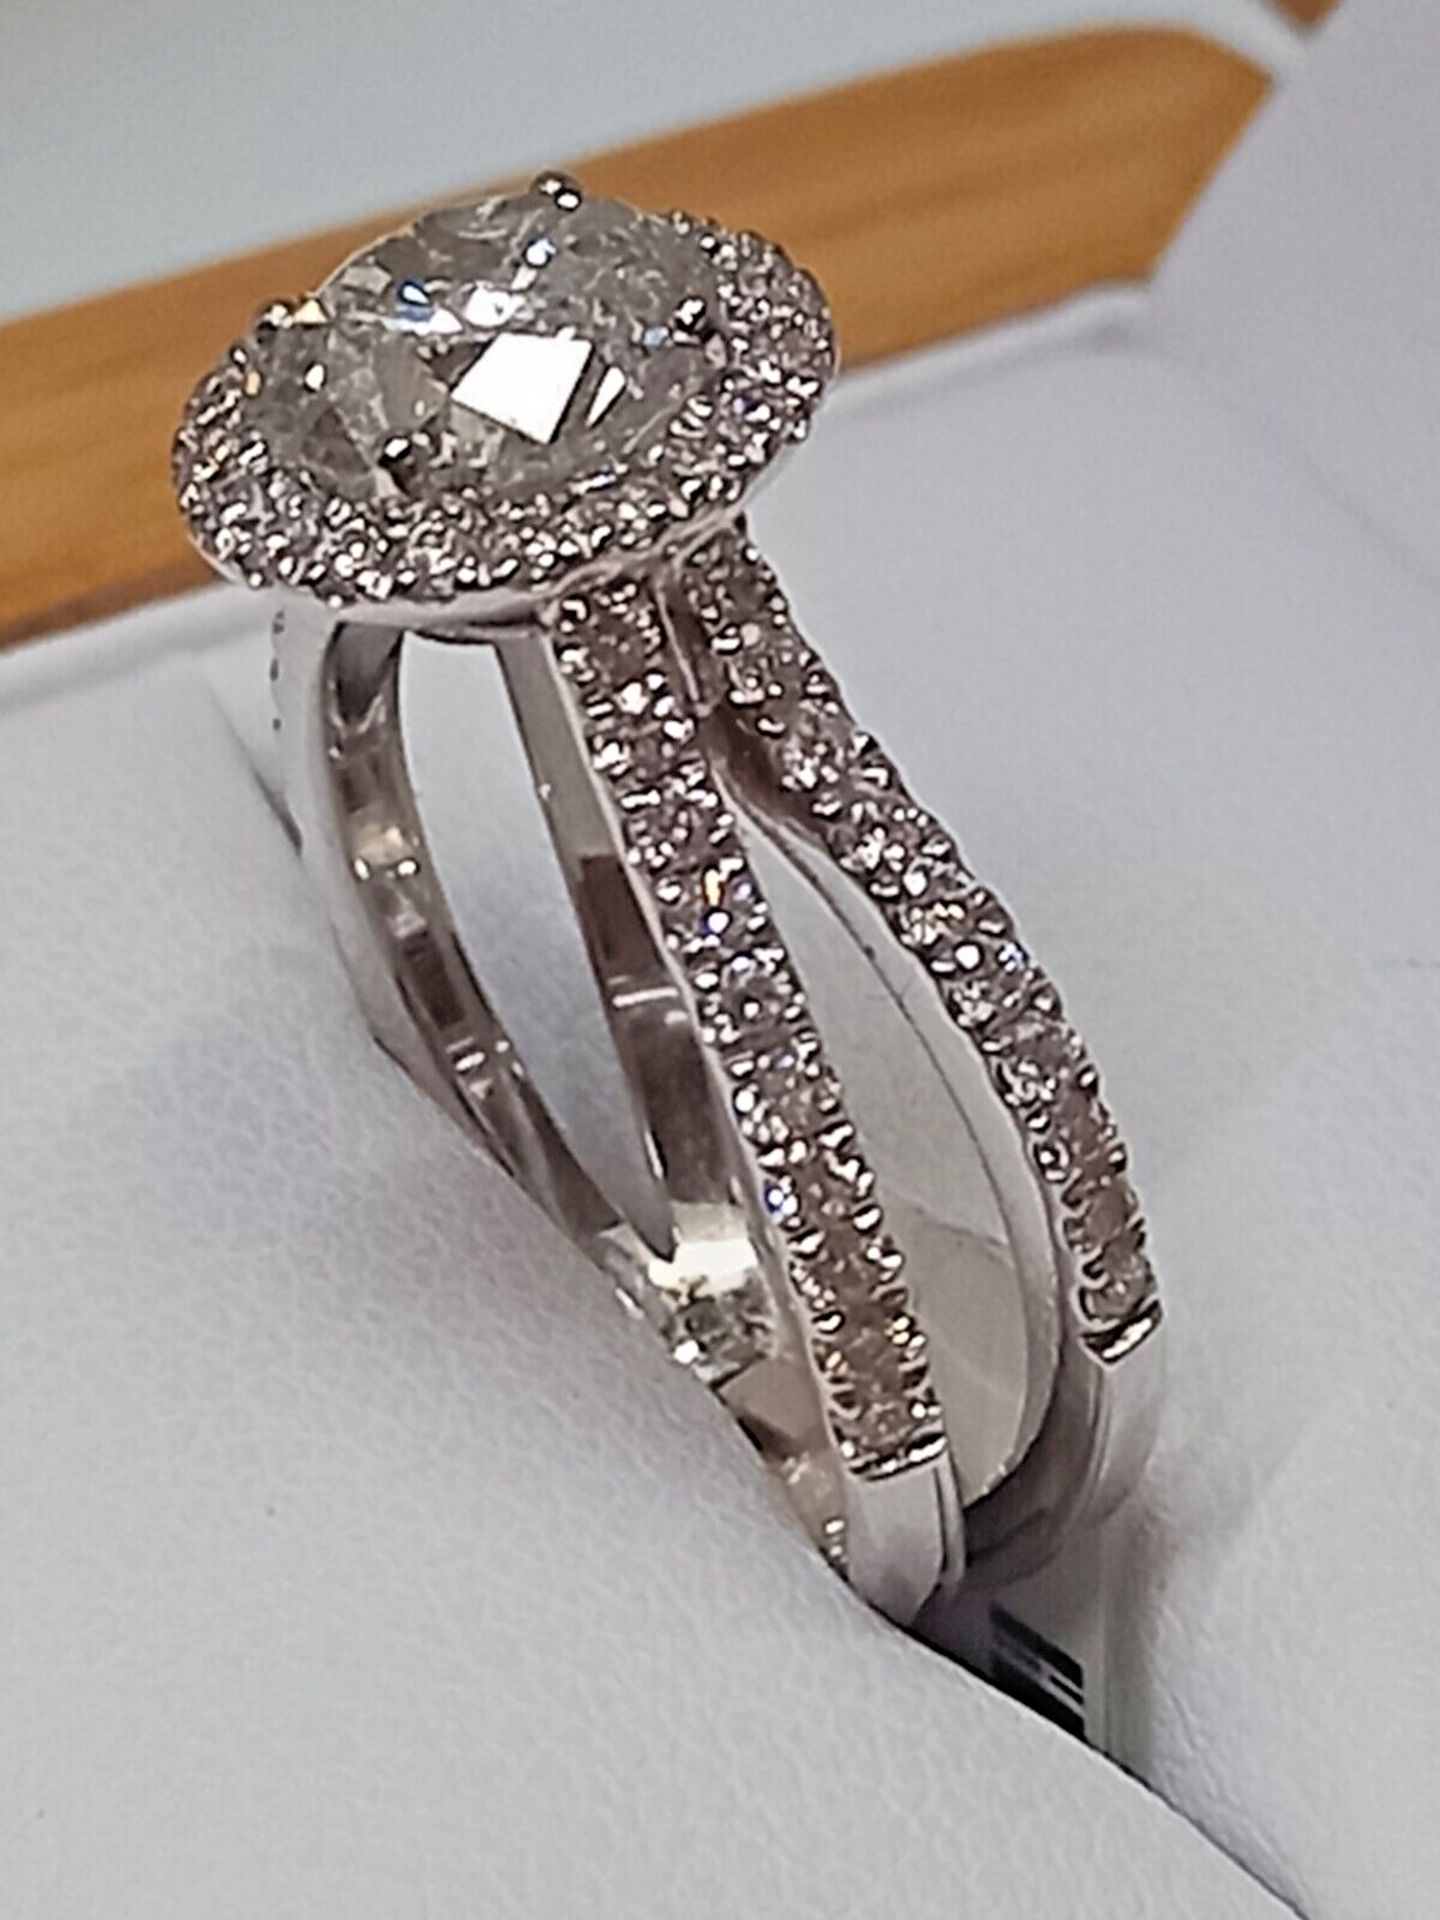 2.20CT HALO SET DIAMOND ENGAGEMENT RING/18CT WHITE GOLD + GIFT BOX + VALUATION CERT OF £7995 - Image 7 of 7